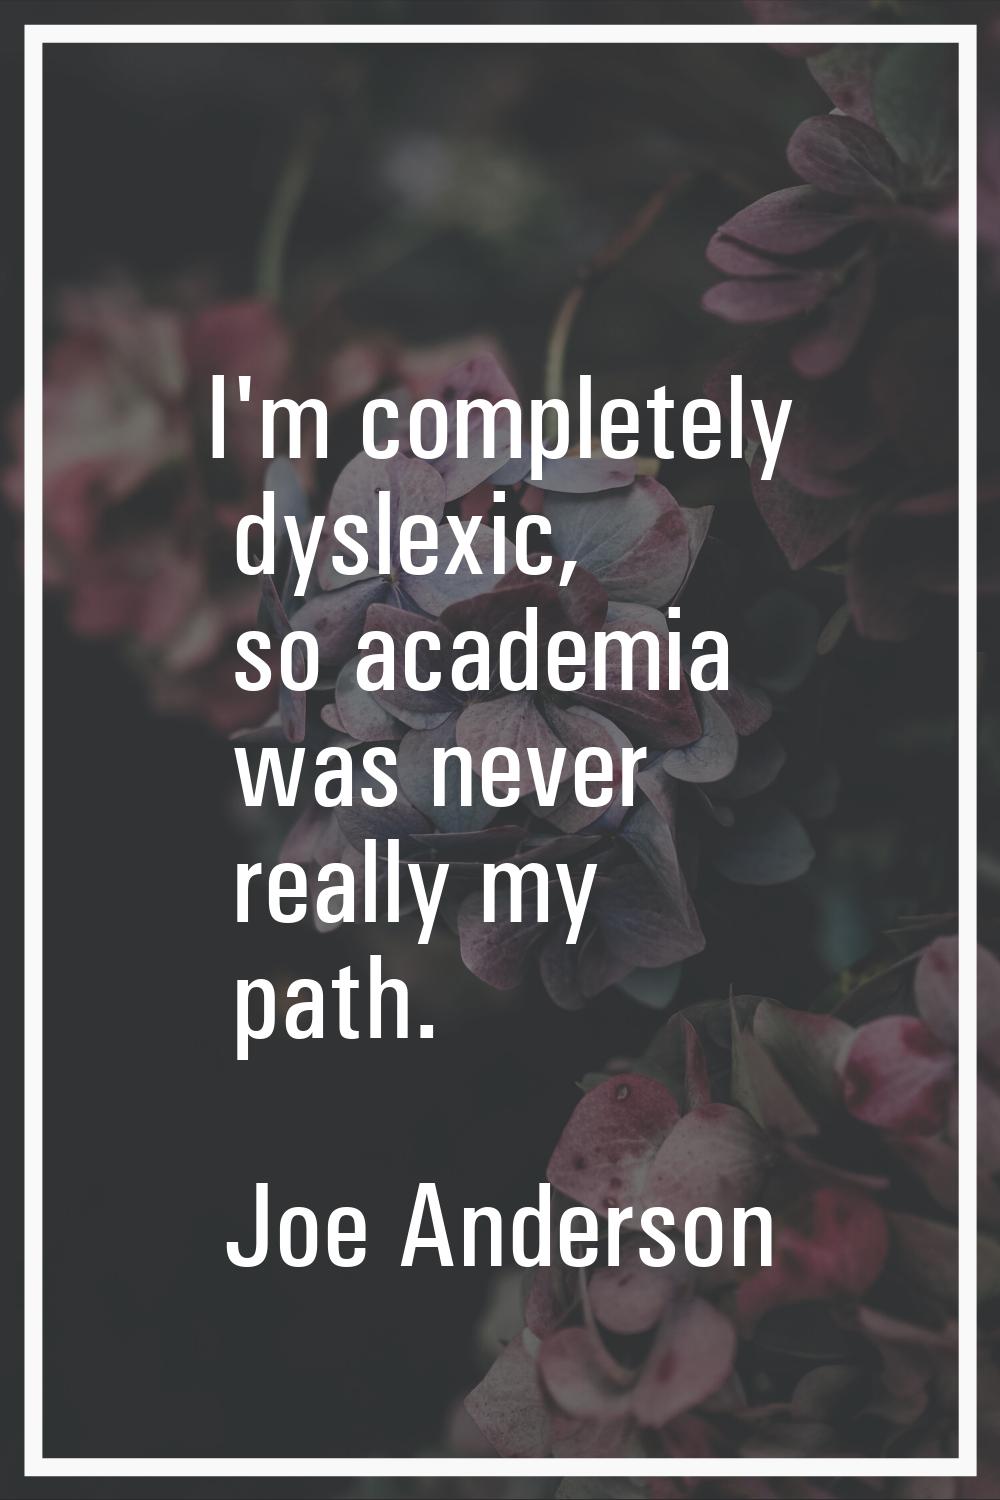 I'm completely dyslexic, so academia was never really my path.